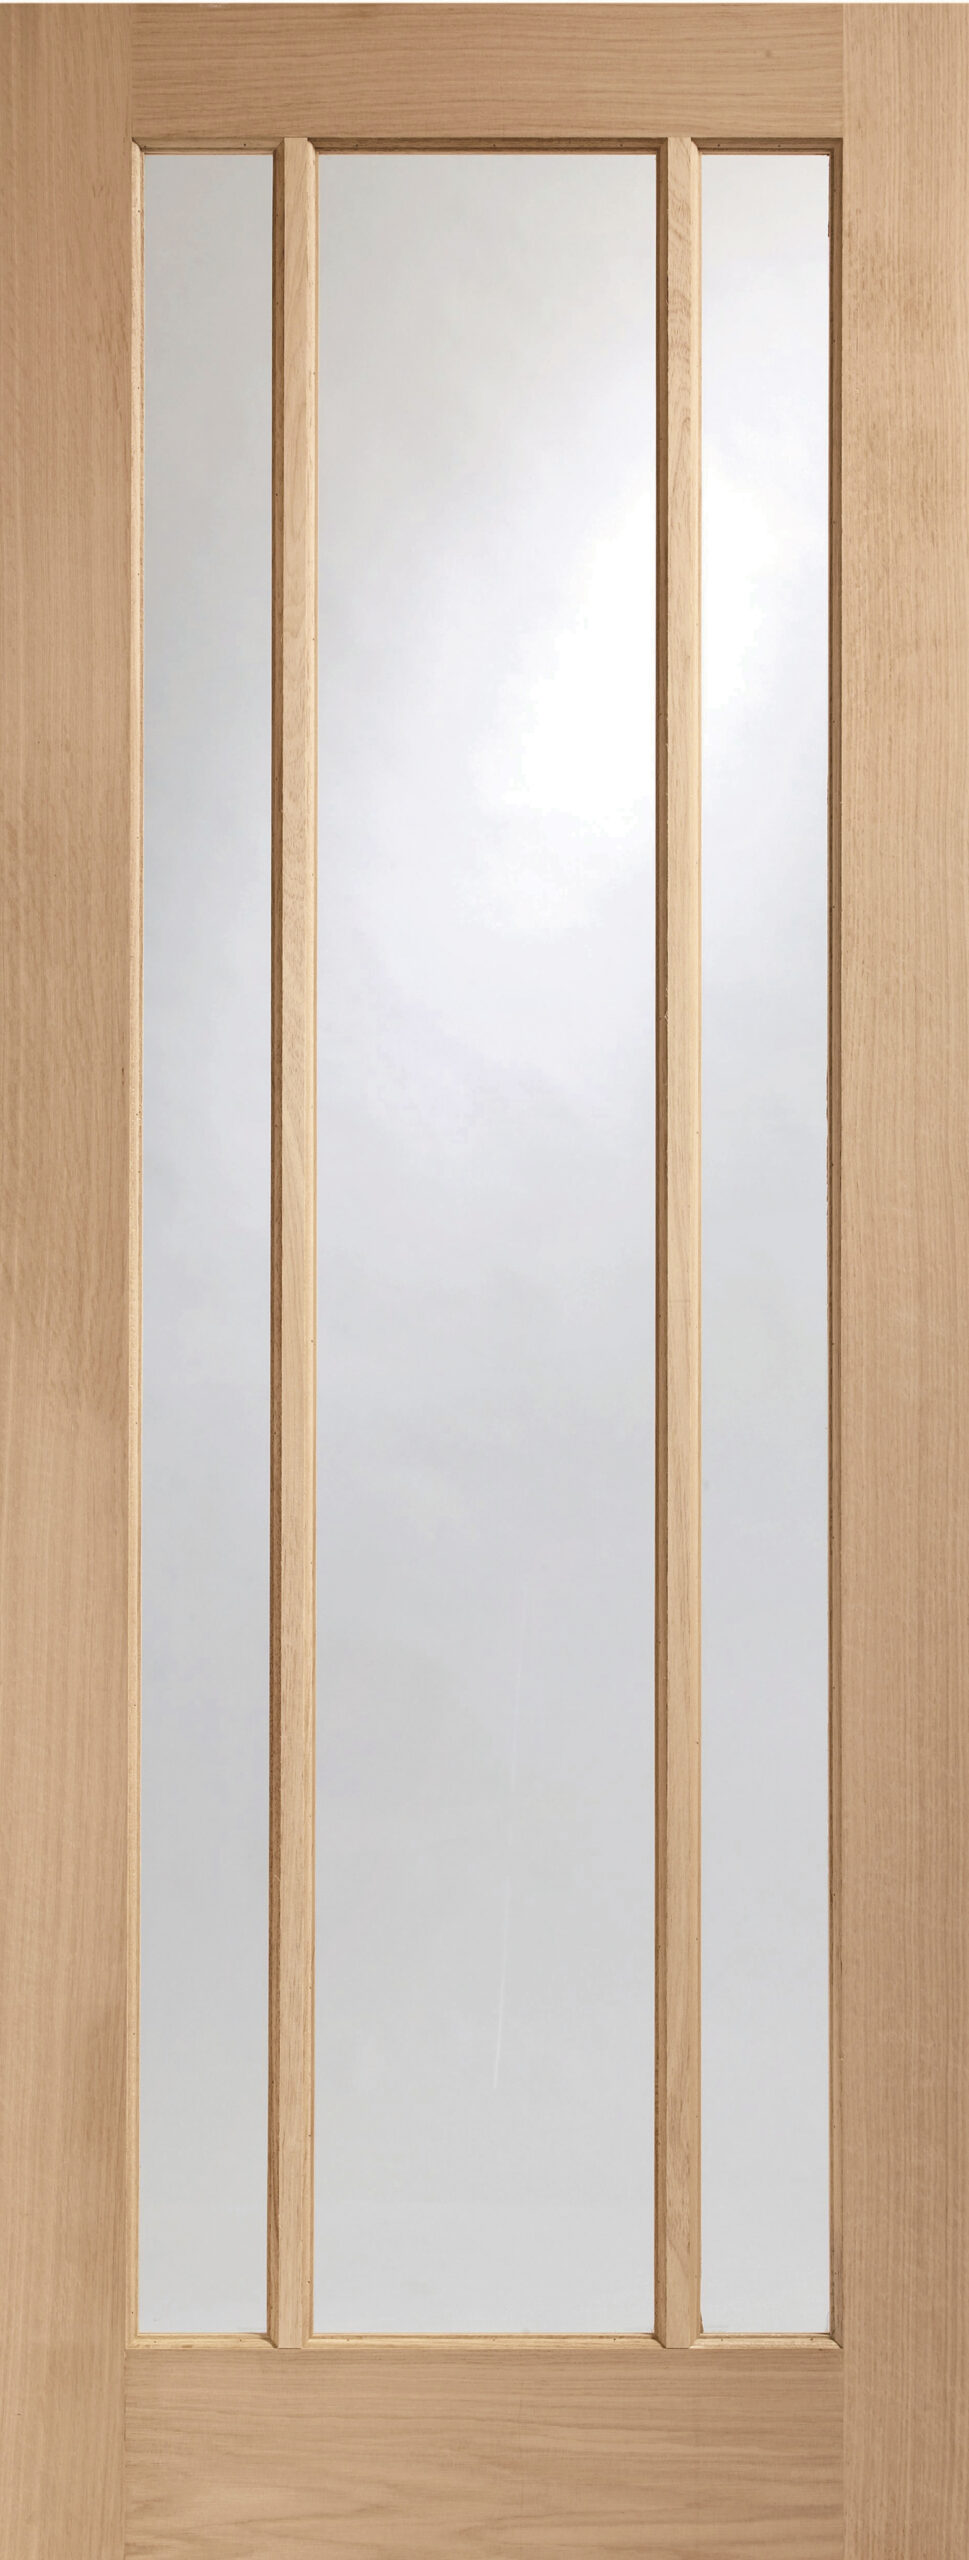 Worcester Pre-Finished Internal Oak Door with Clear Glass – Pre-Finished, 1981 x 610 x 35 mm